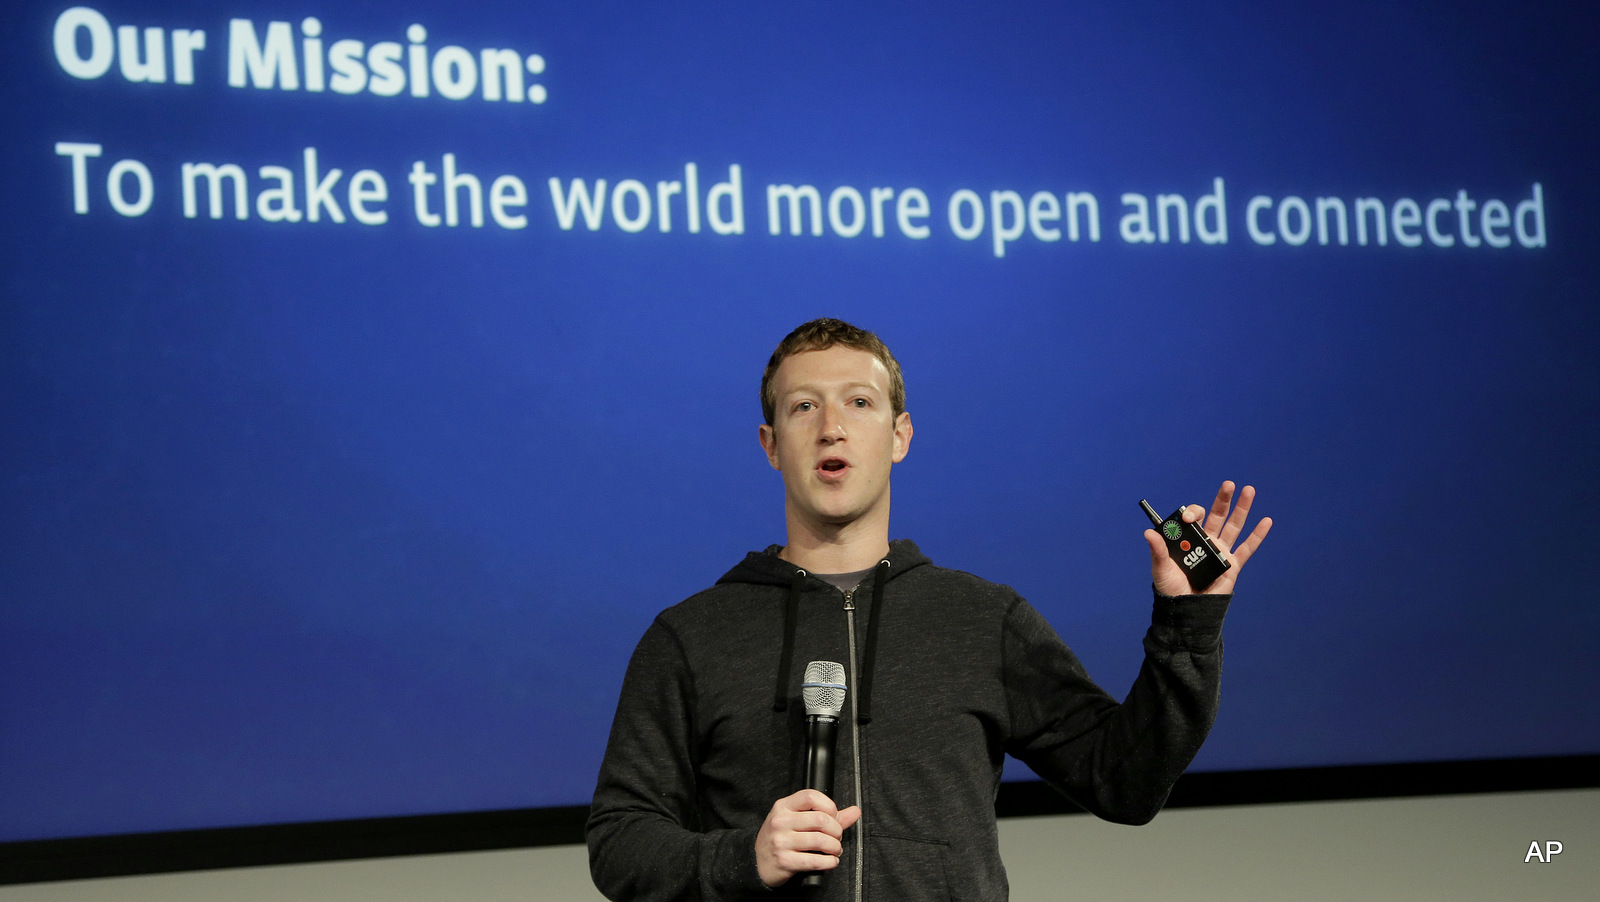 Facebook CEO Mark Zuckerberg speaks at the company's headquarters in Menlo Park, Calif. where Facebook Inc. announced a partnership called Internet.org on Wednesday, Aug. 21, 2013.